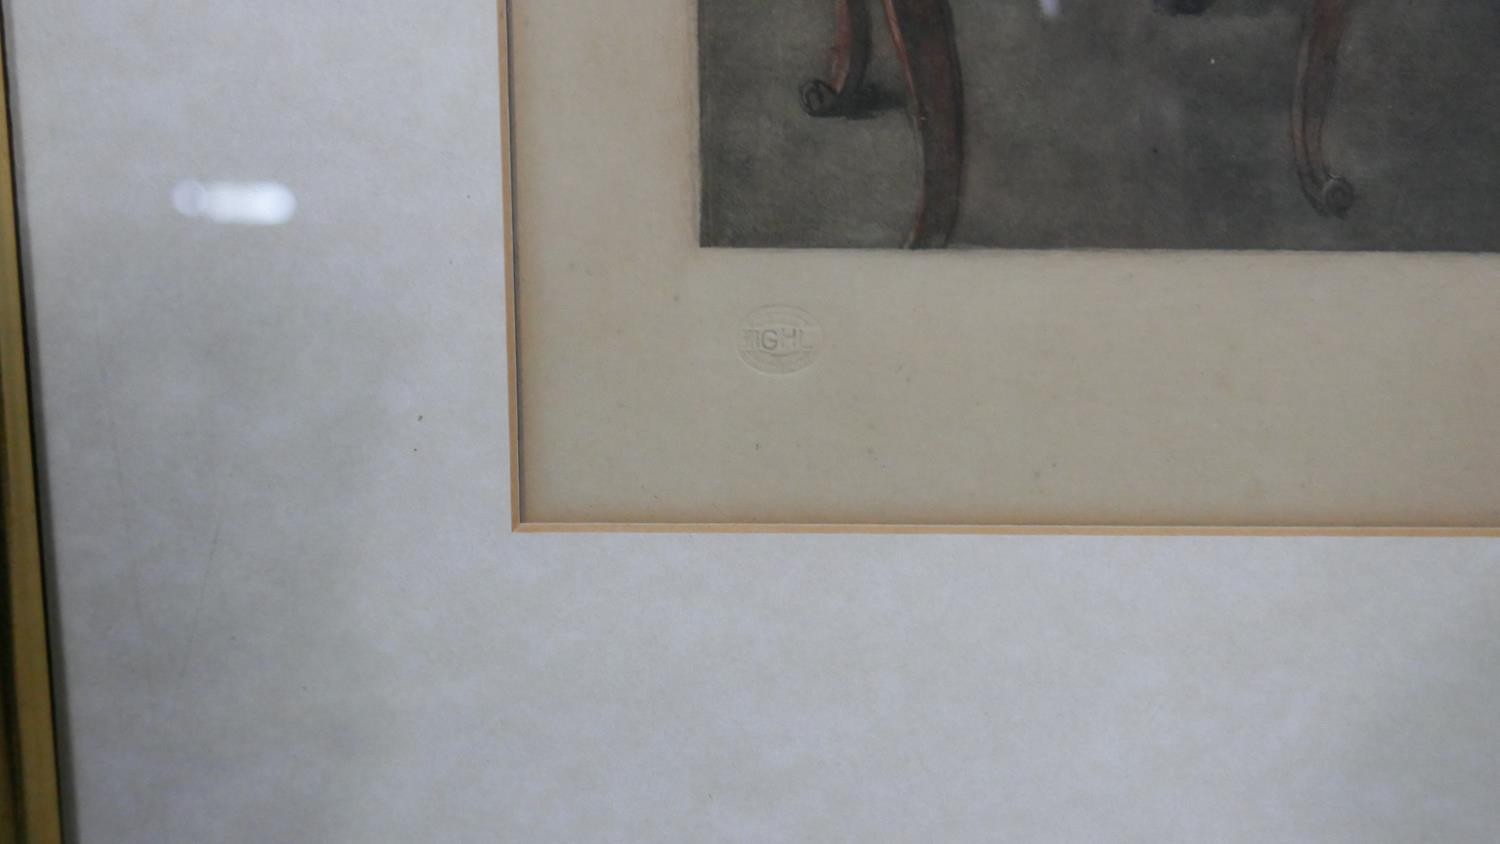 P Hampden Hart, aquatints of four famous paintings, with impressed water mark and signed. H.56 W. - Image 13 of 20